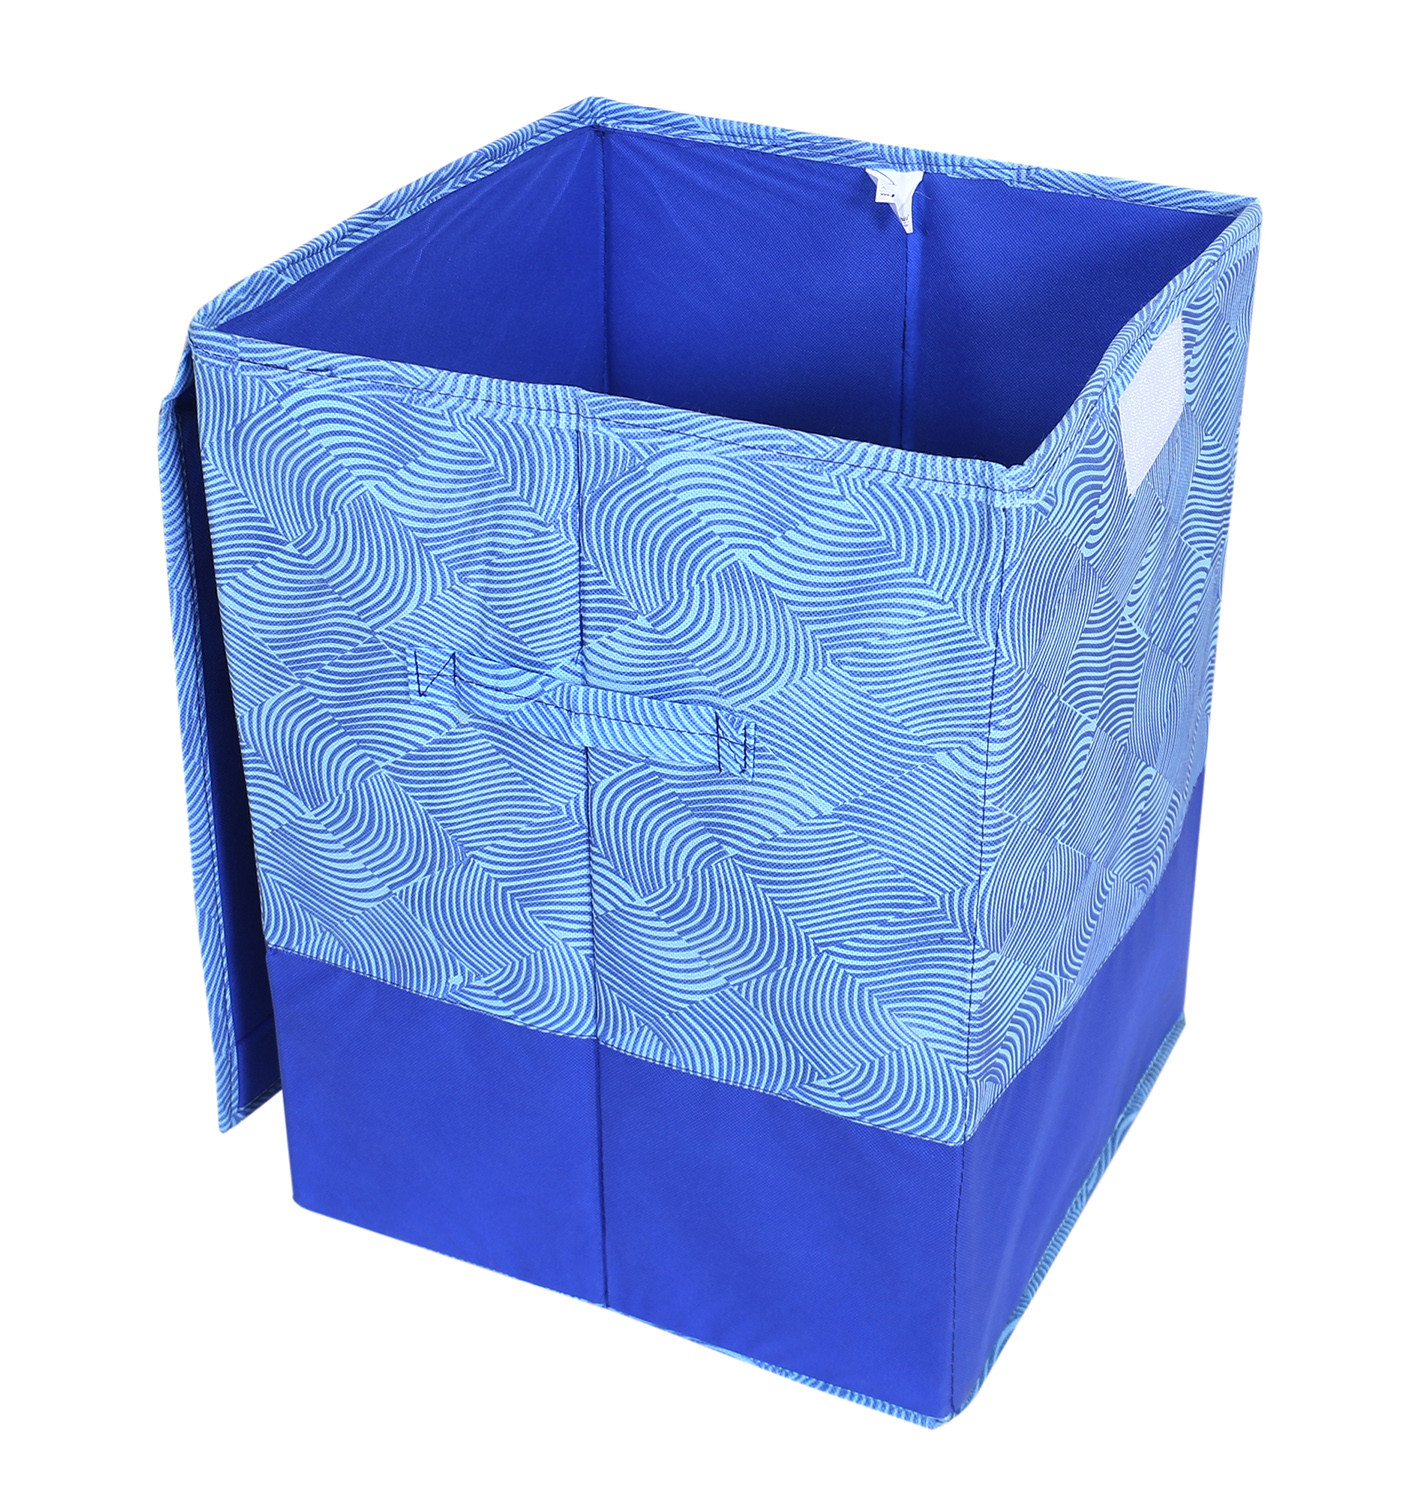 Kuber Industries Multiuses Leheriya Print Non-Woven Laundry Basket, Clothes Hamper For Laundry Closet, Bedroom, Bathroom With Lid & Handles (Blue)